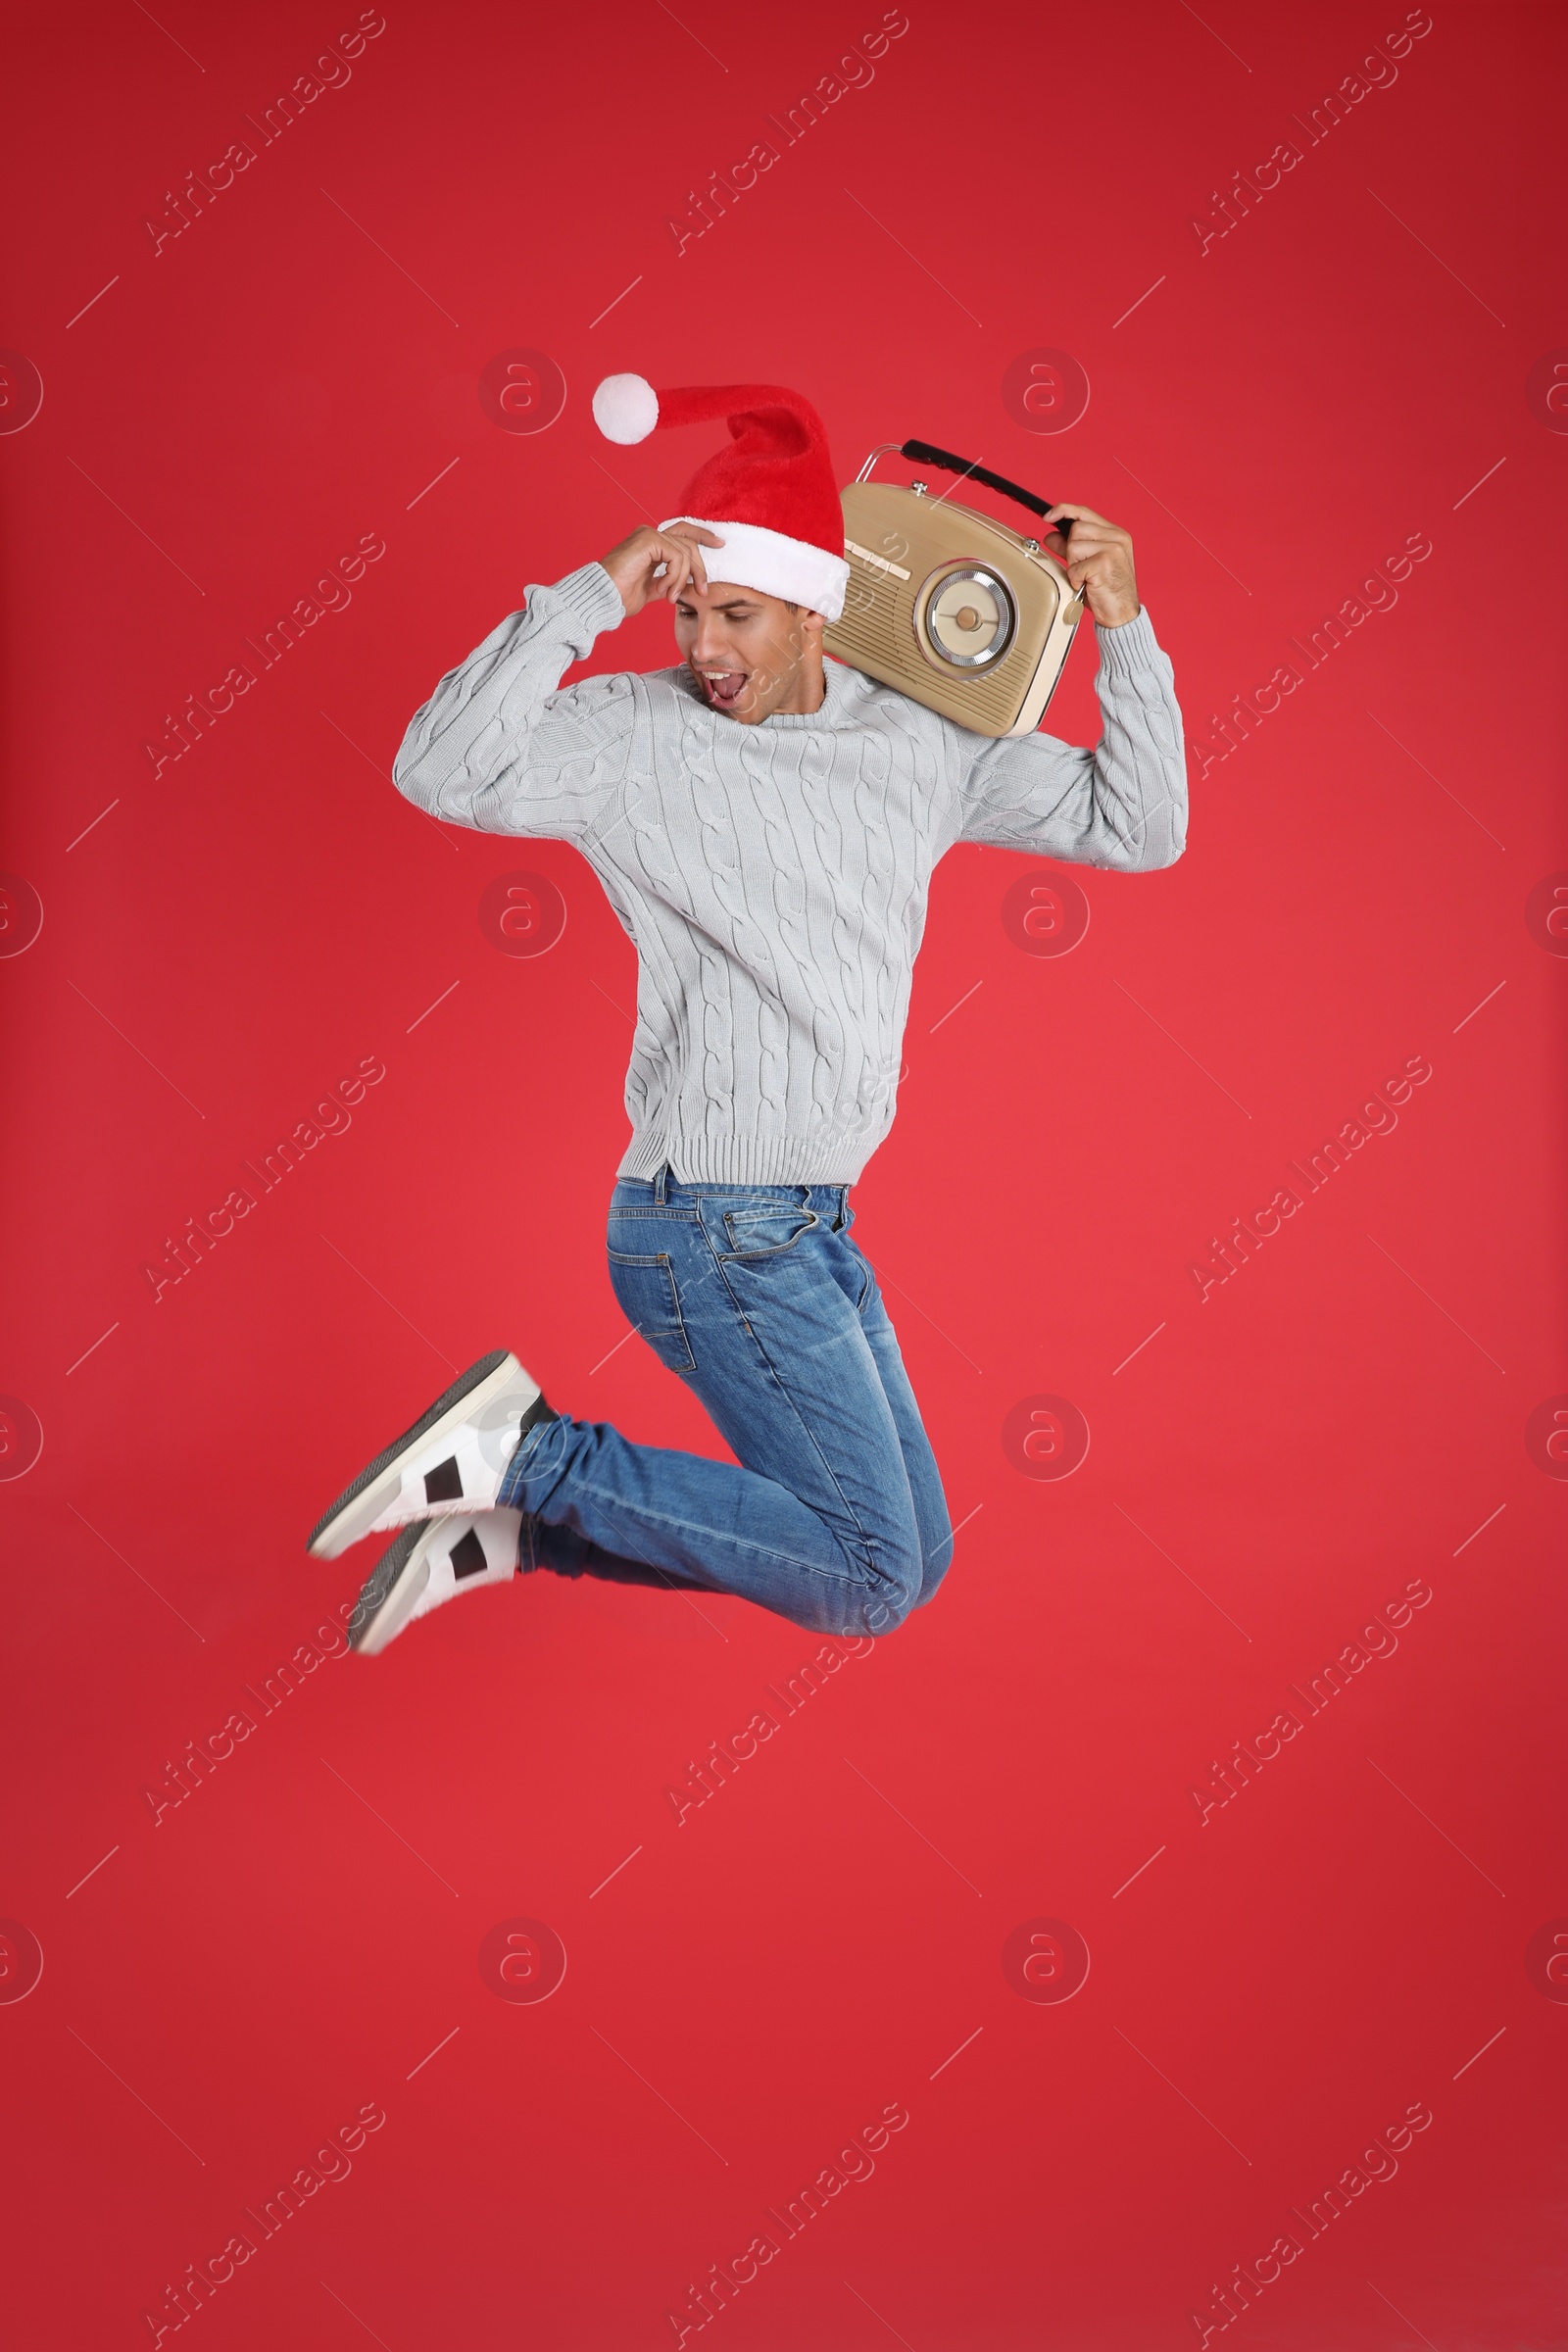 Photo of Emotional man with vintage radio jumping on red background. Christmas music